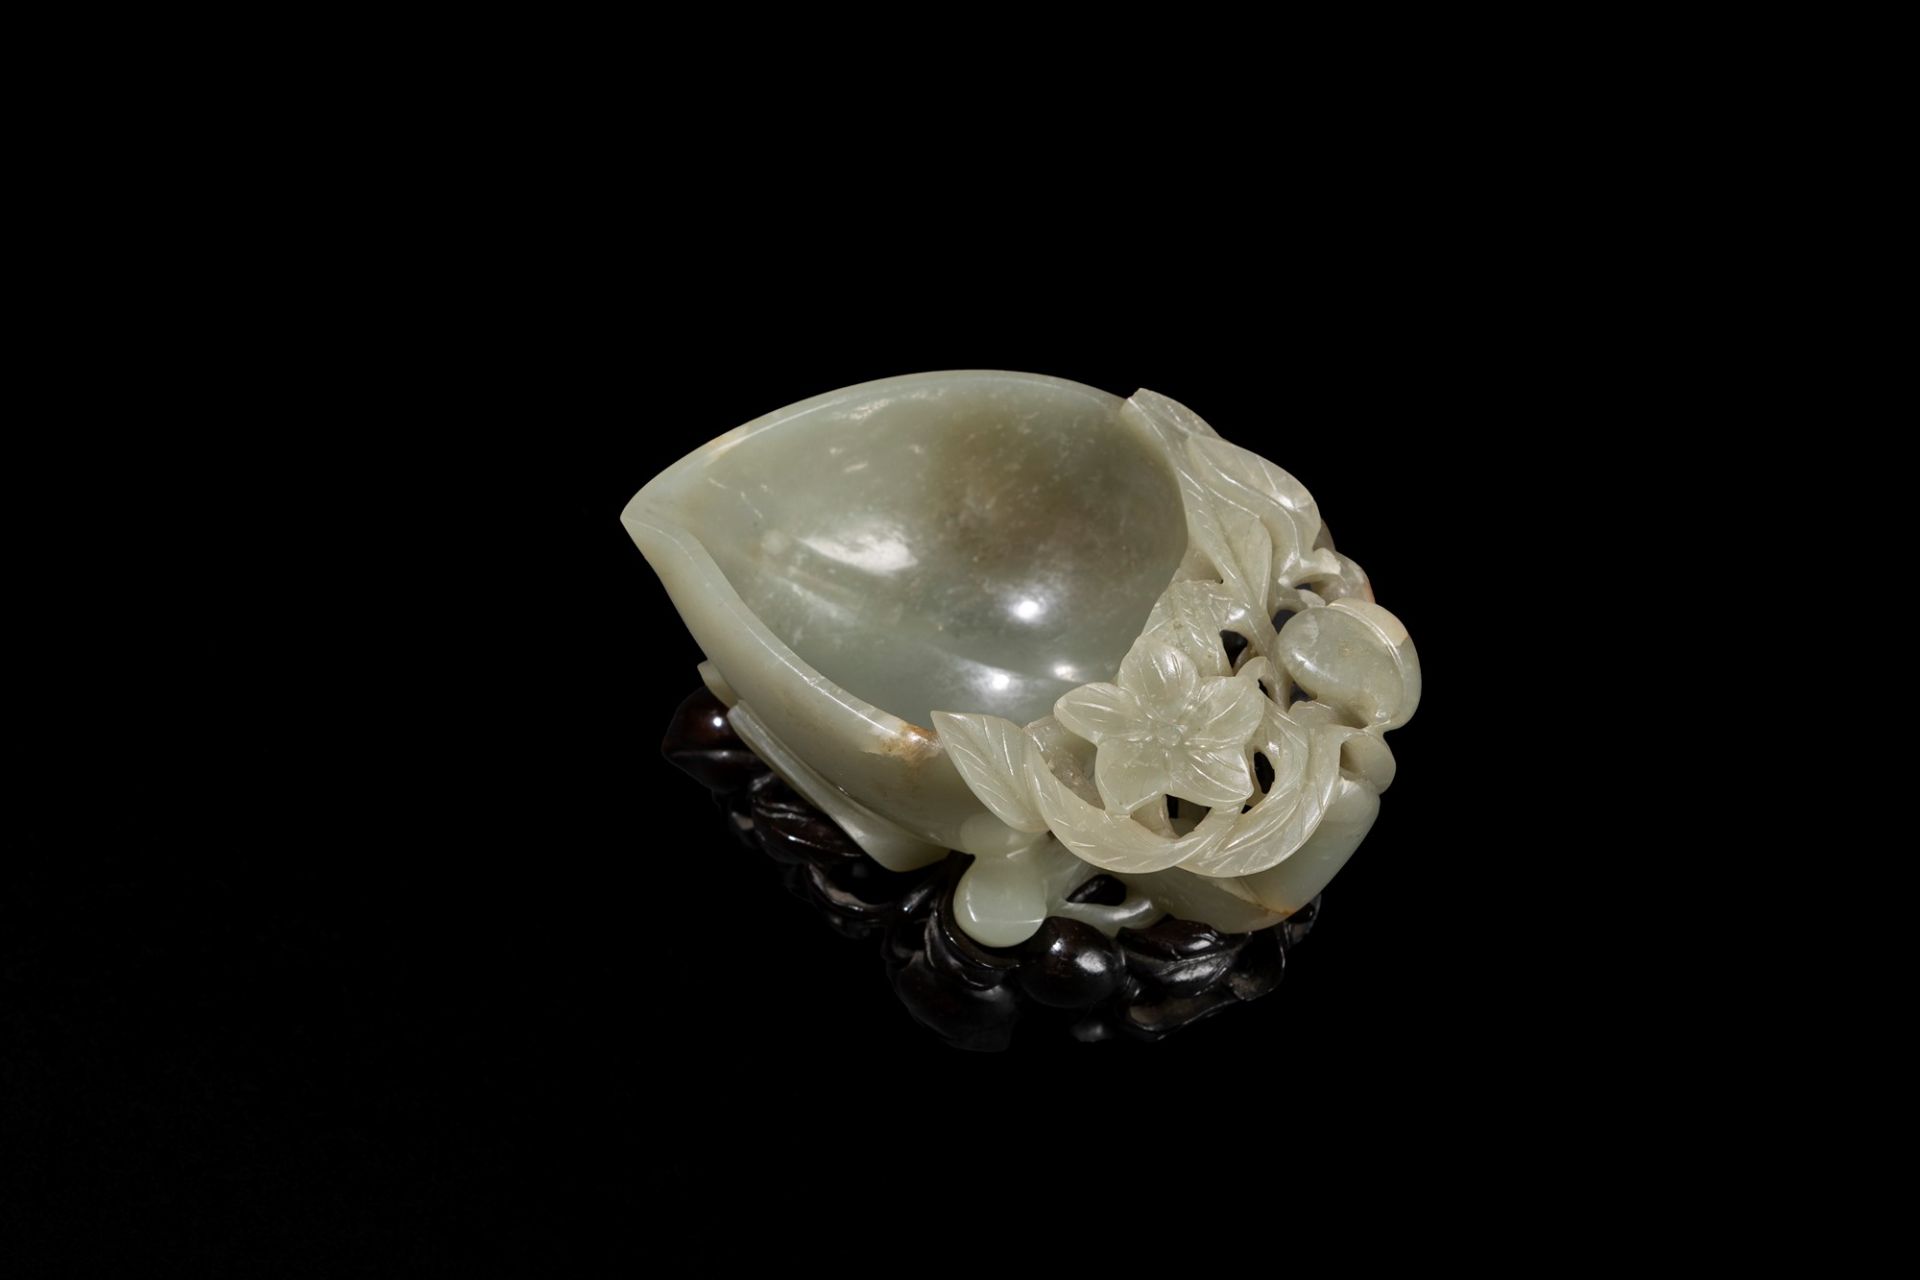 A FINE CELADON JADE PEACH FORM POURING VESSEL, China, Ming Dynasty, 17th century